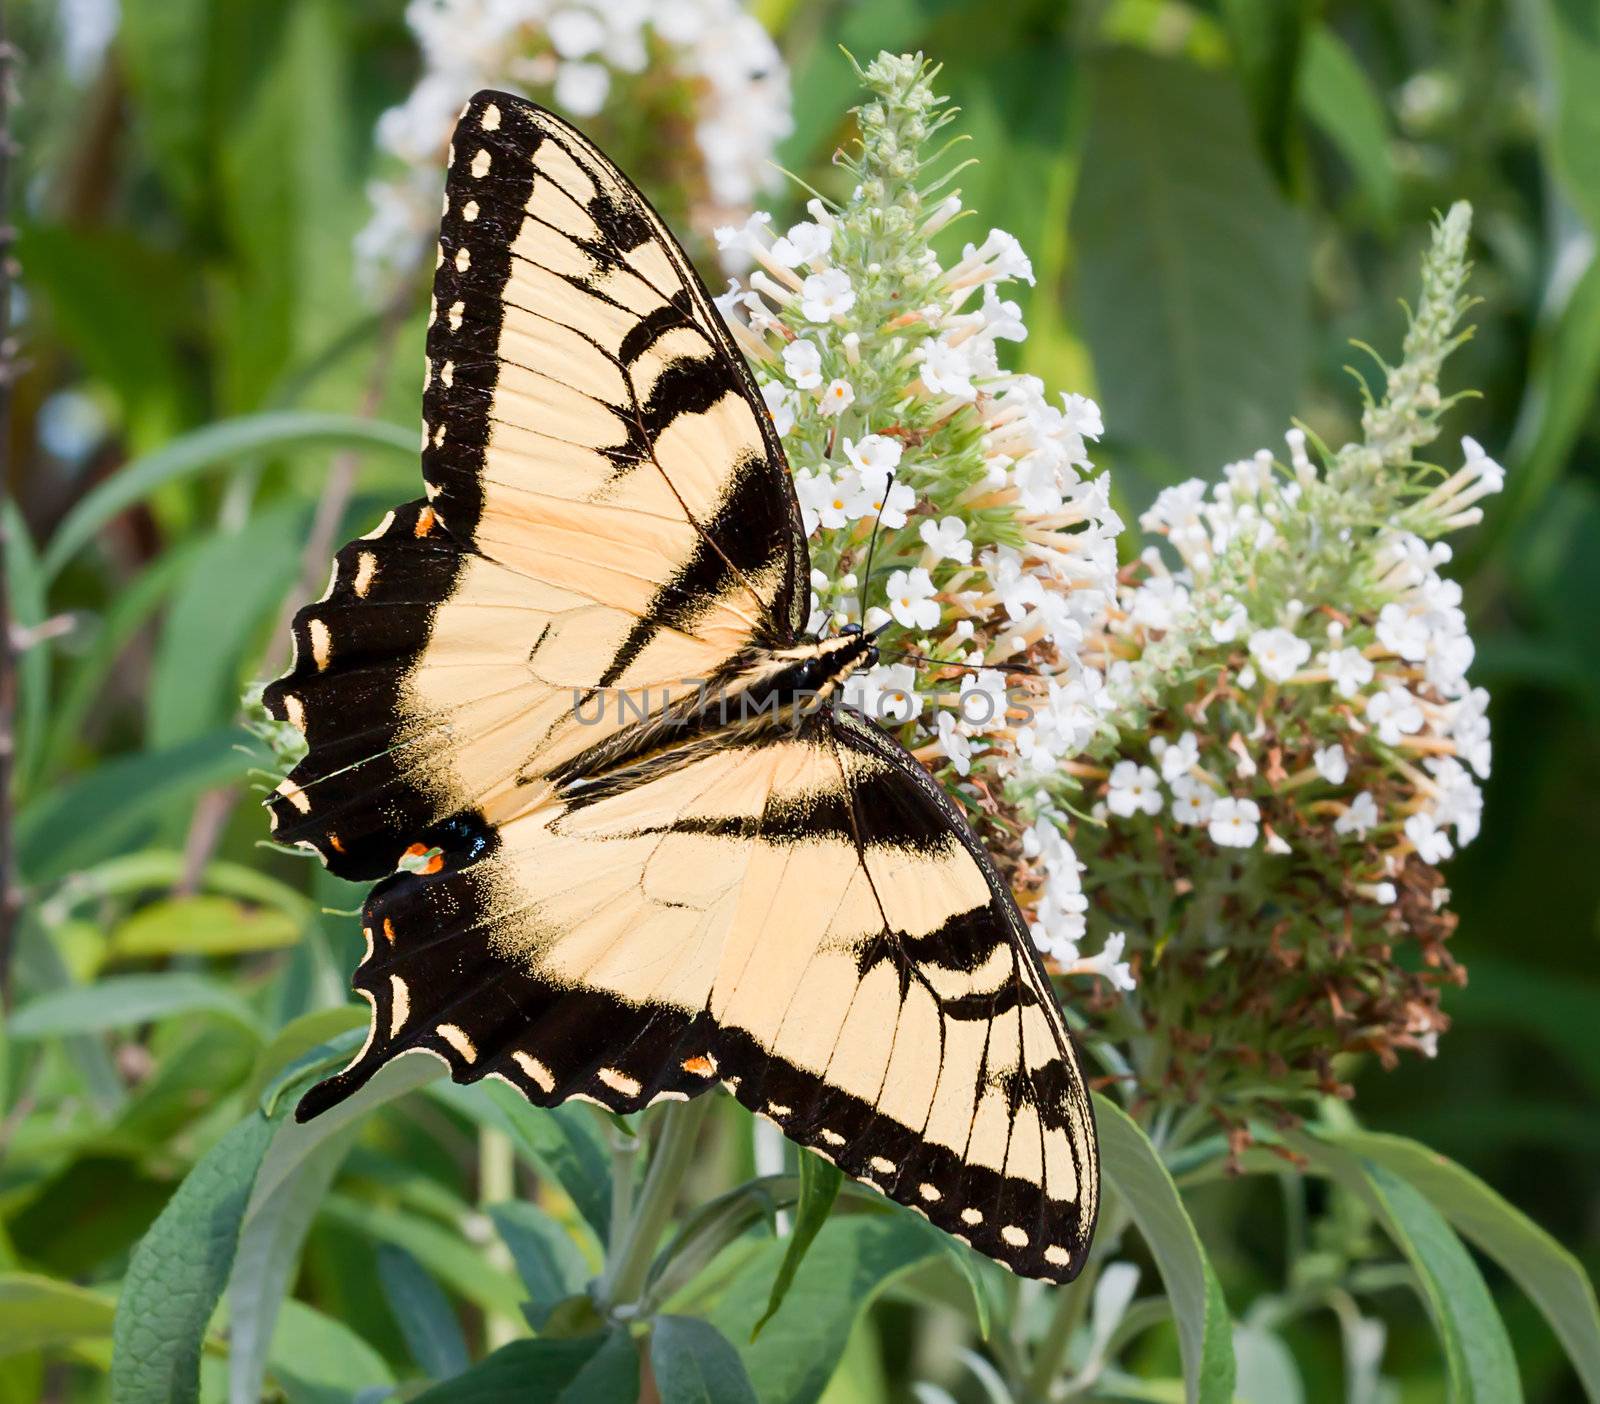 An Eastern Tiger Swallowtail (Papilio glaucus) butterfly on a flower in a garden